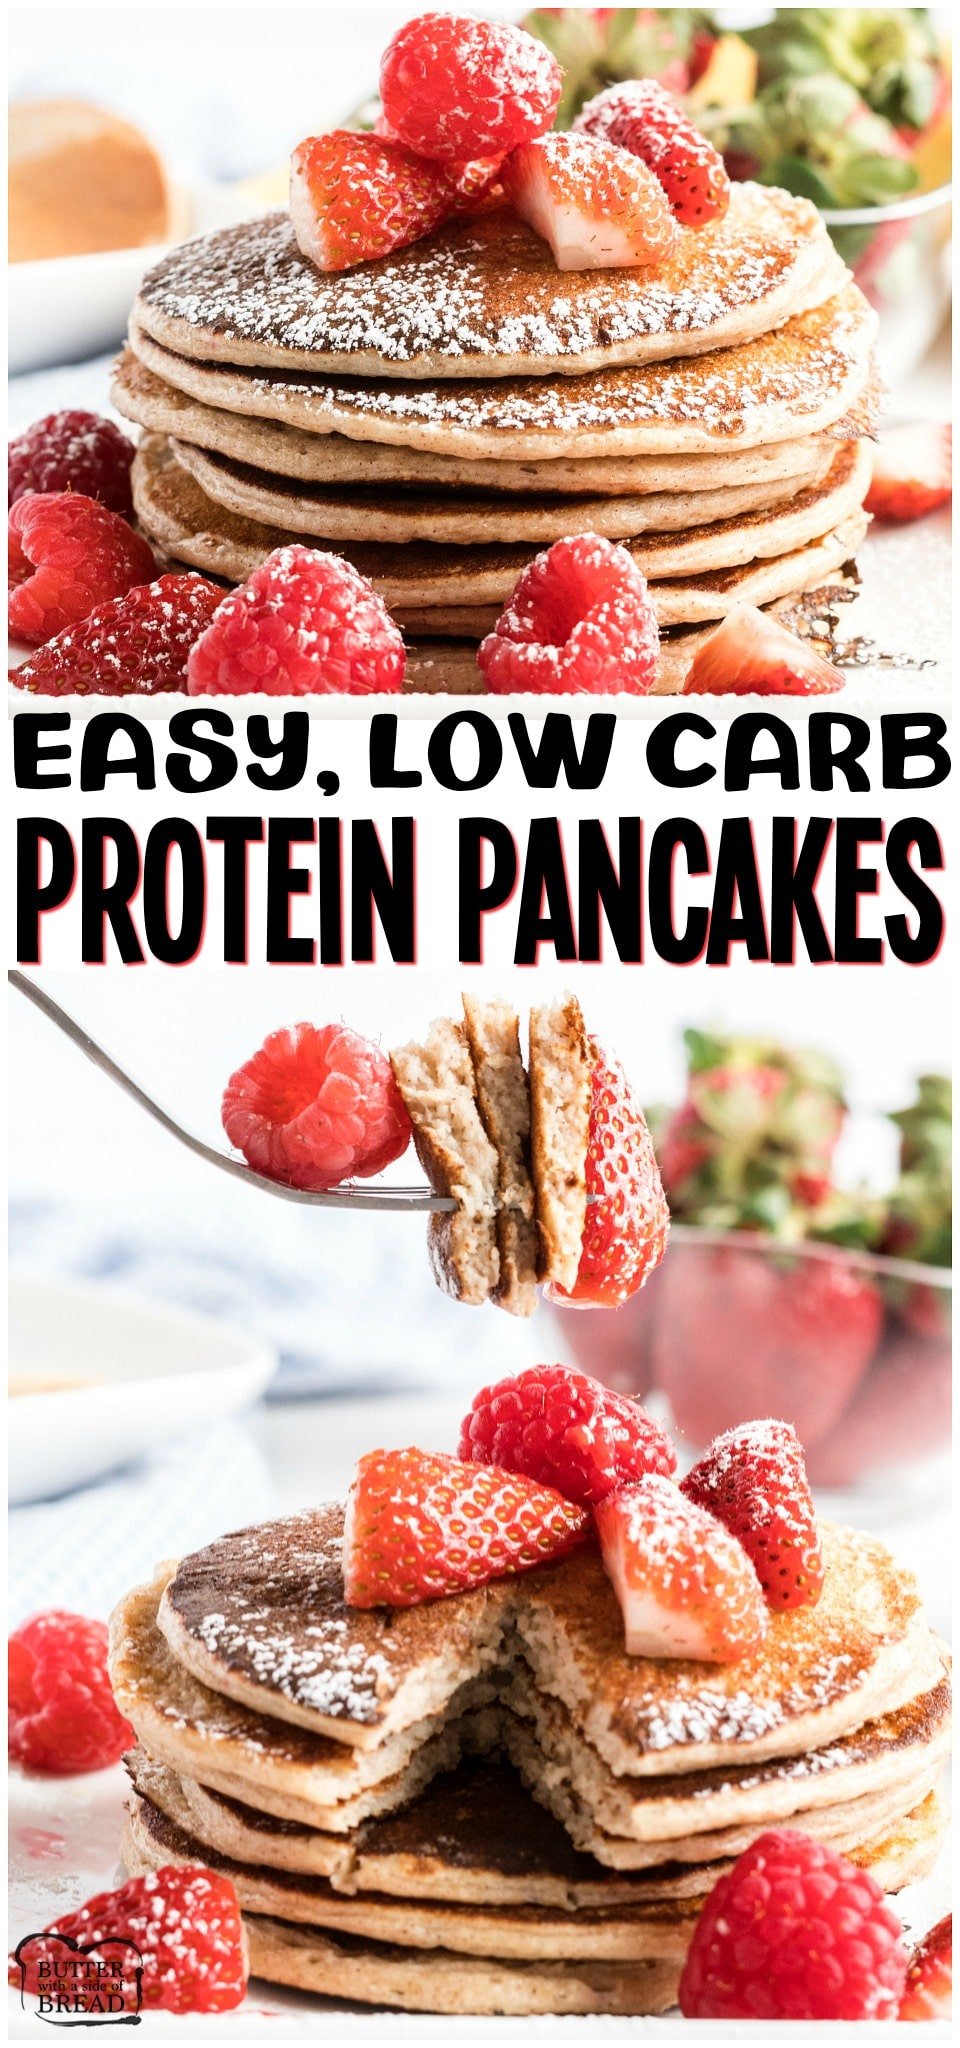 Easy Protein Pancakes recipe packed with protein and healthy ingredients to make a gluten free low carb pancake worthy of your breakfast table.